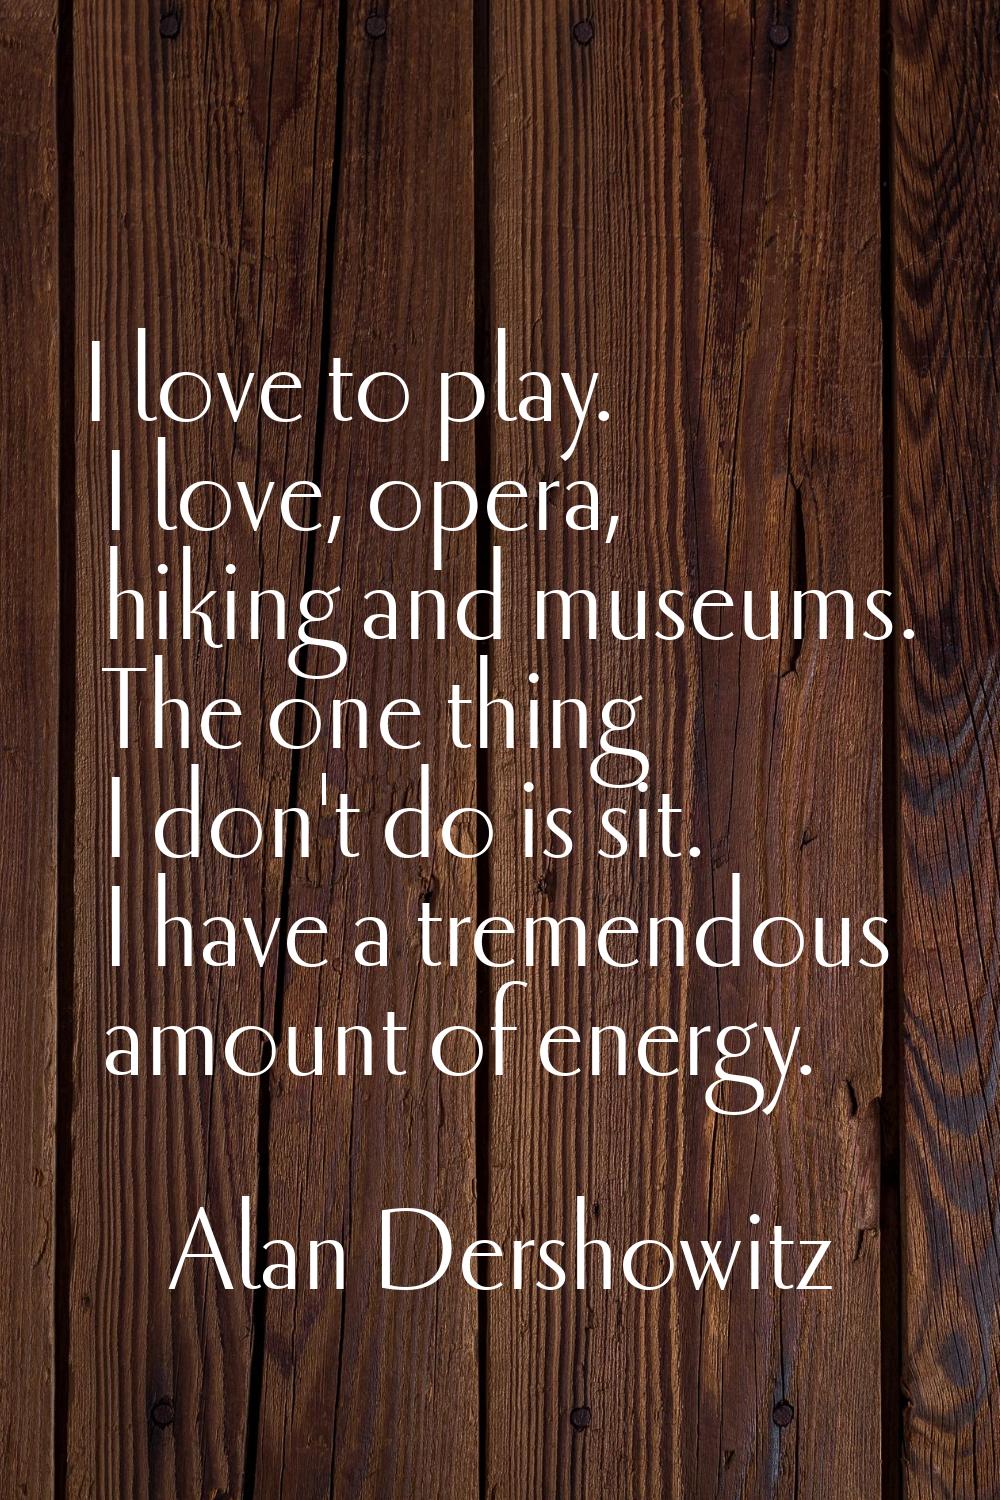 I love to play. I love, opera, hiking and museums. The one thing I don't do is sit. I have a tremen